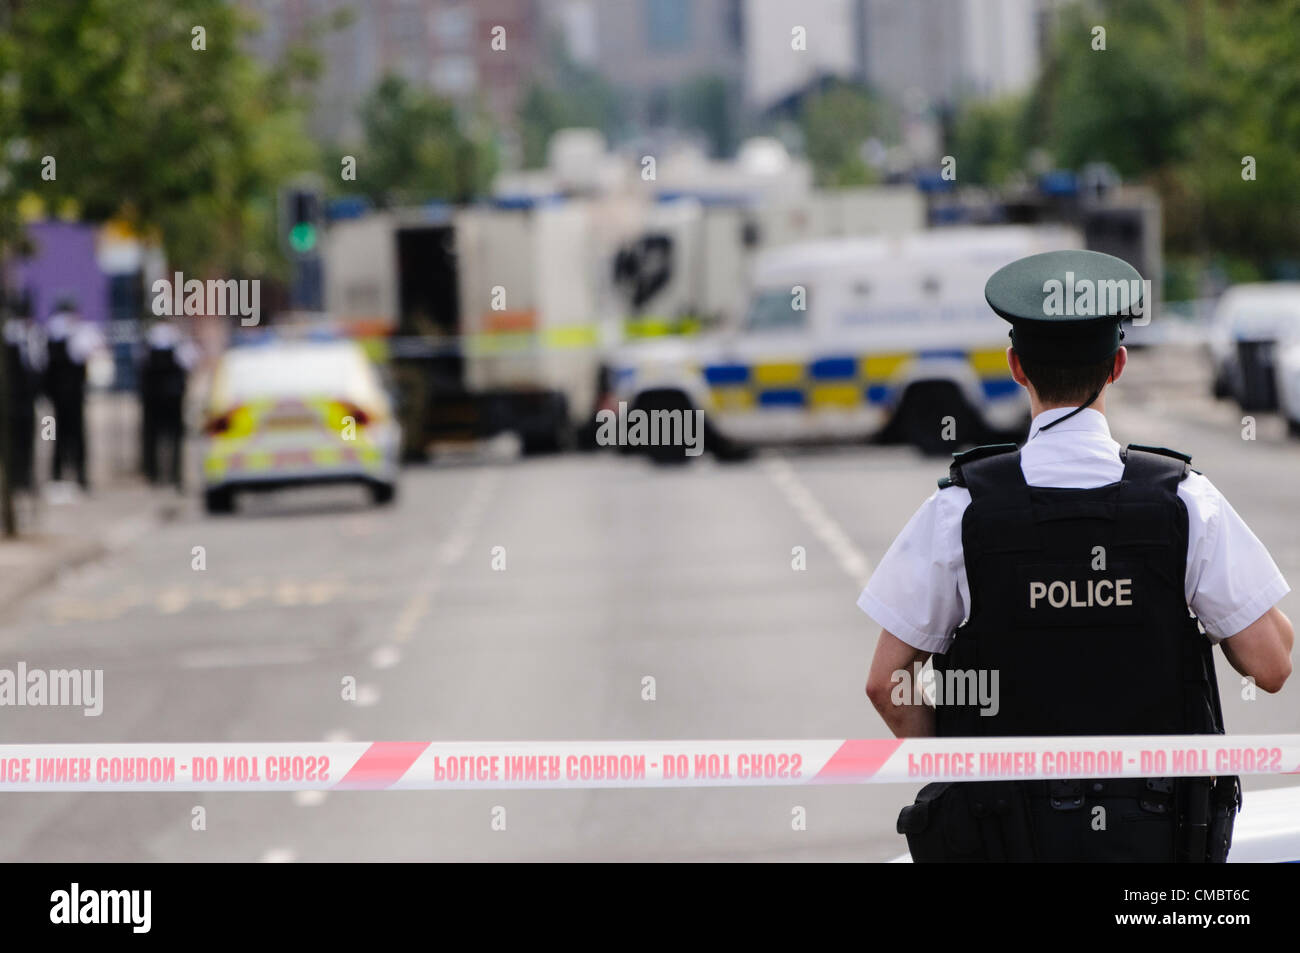 Belfast, Northern Ireland. 13/07/2013 - Police officer from the PSNI stands guard at a Police cordon point while army ATOs from the Royal Logistics Corp deal with a suspect bomb. Stock Photo